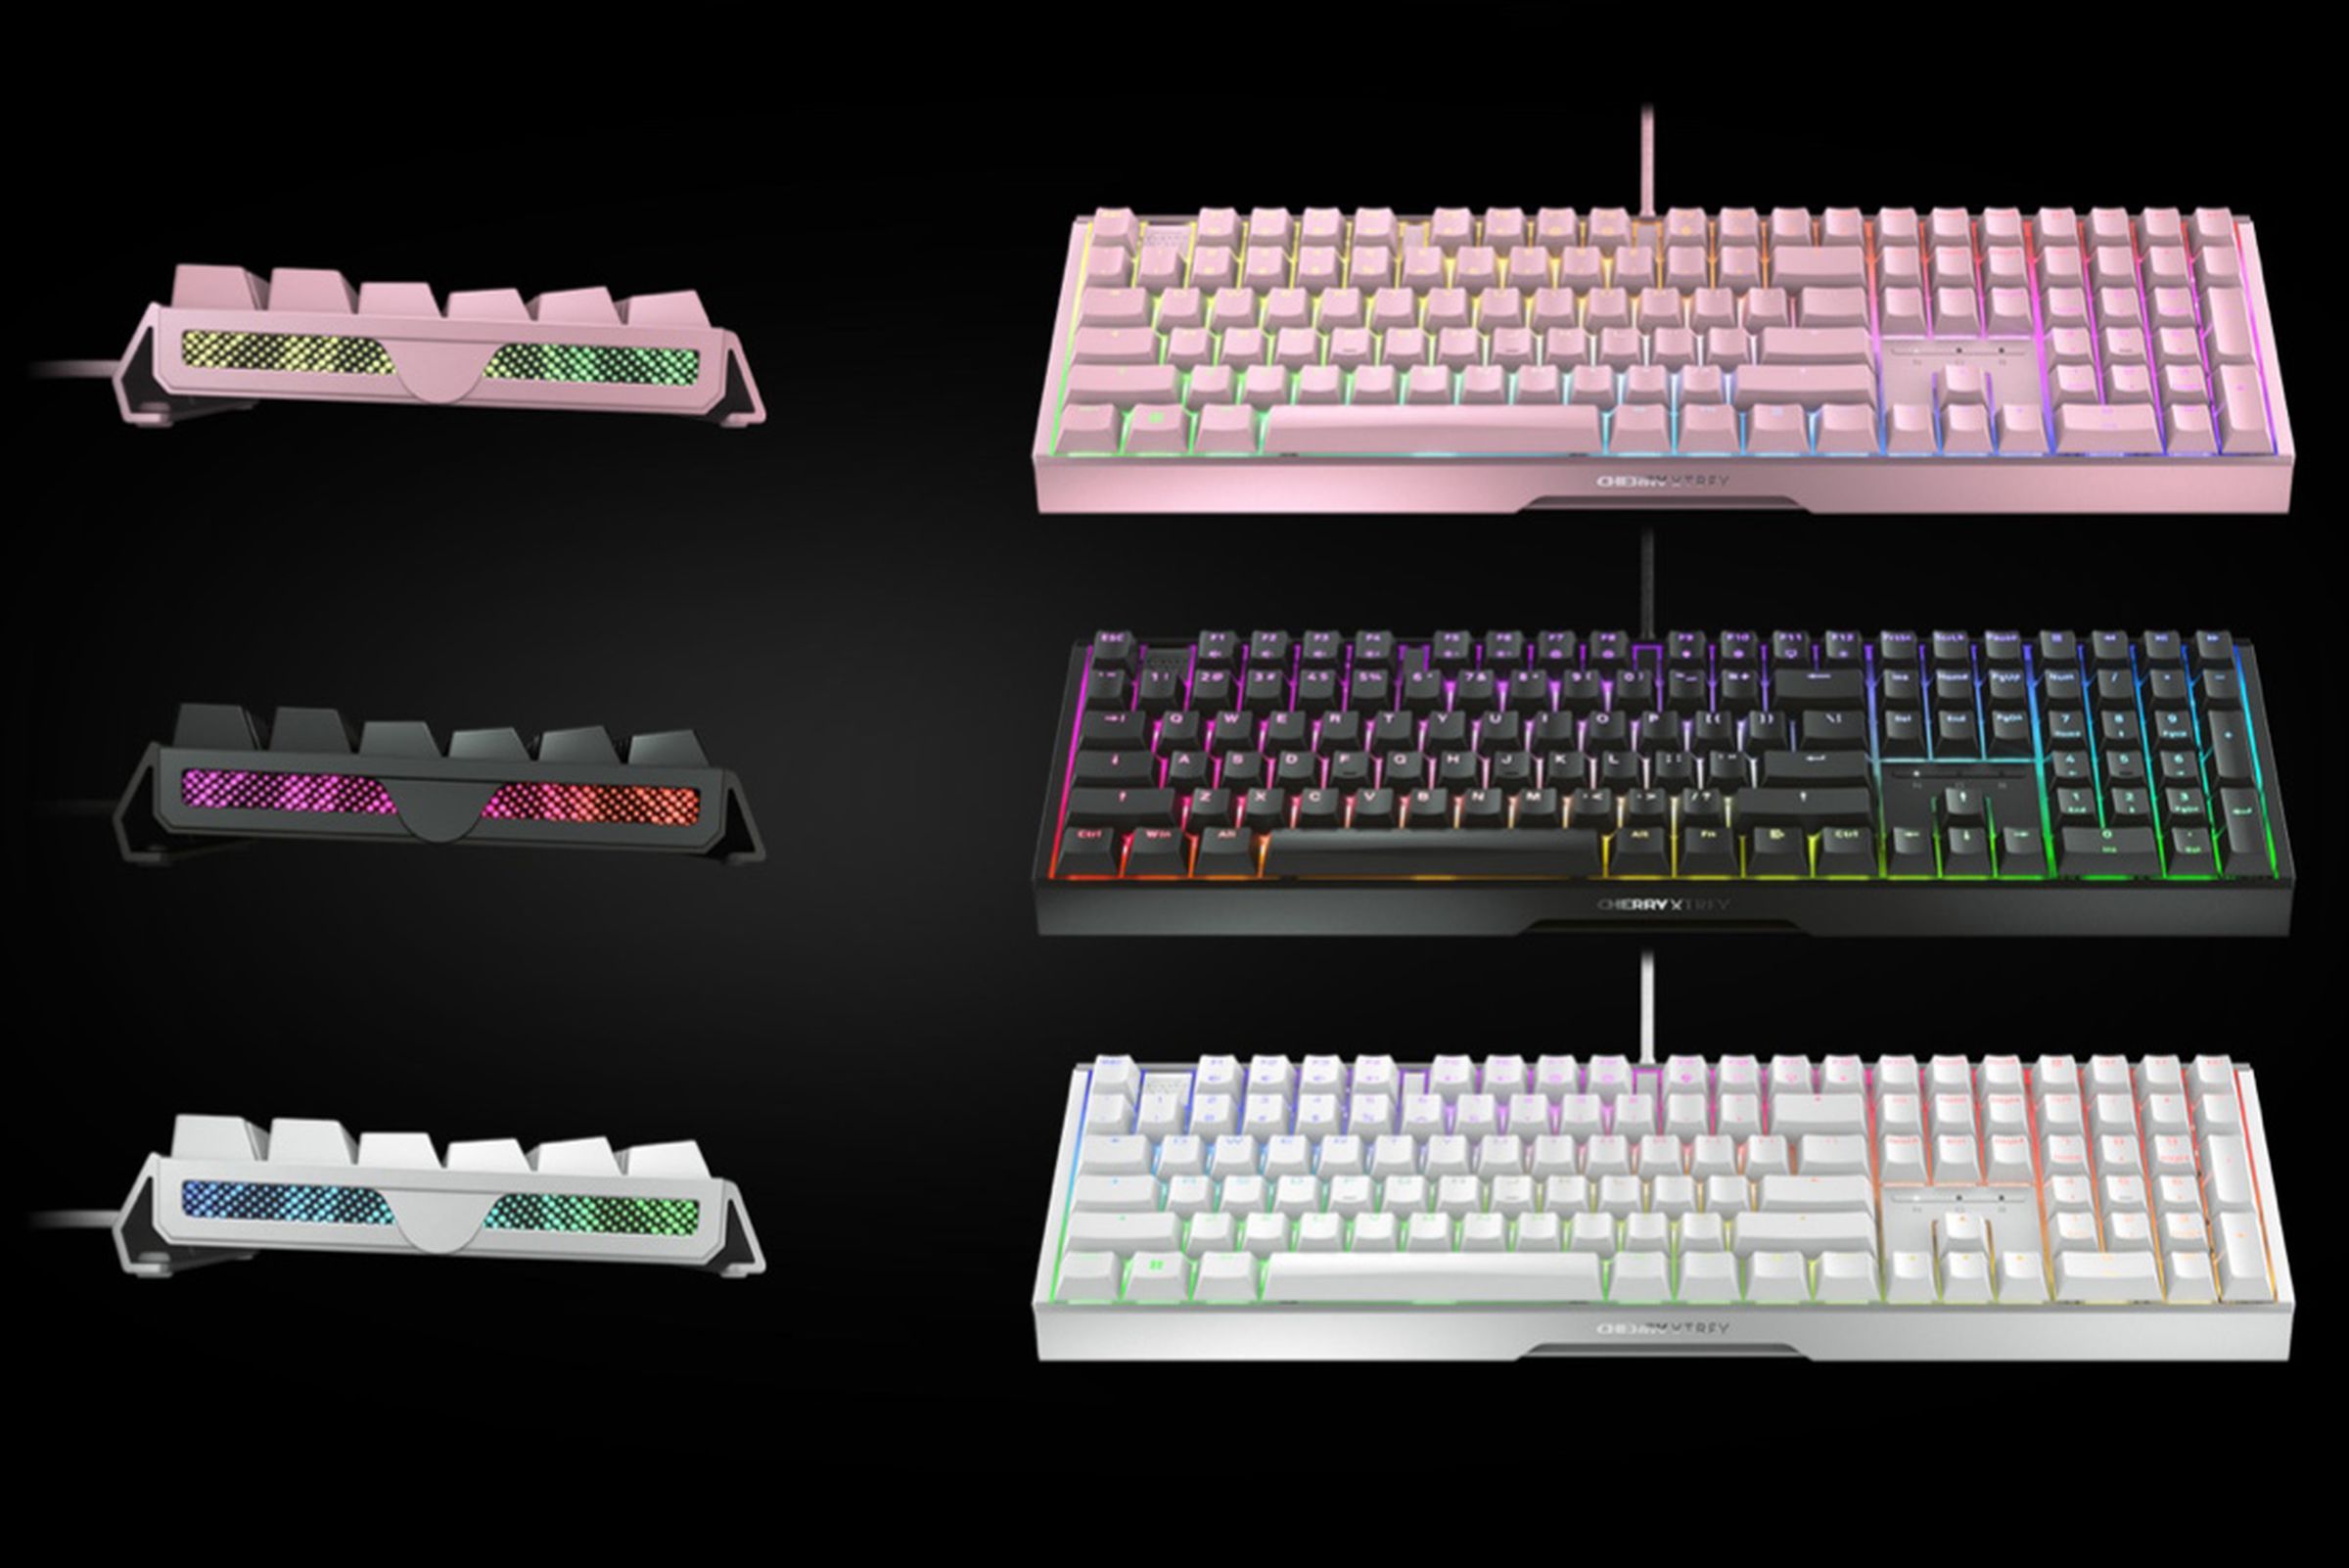 Cherry MX 3.1 keyboard in pink, black, and white.